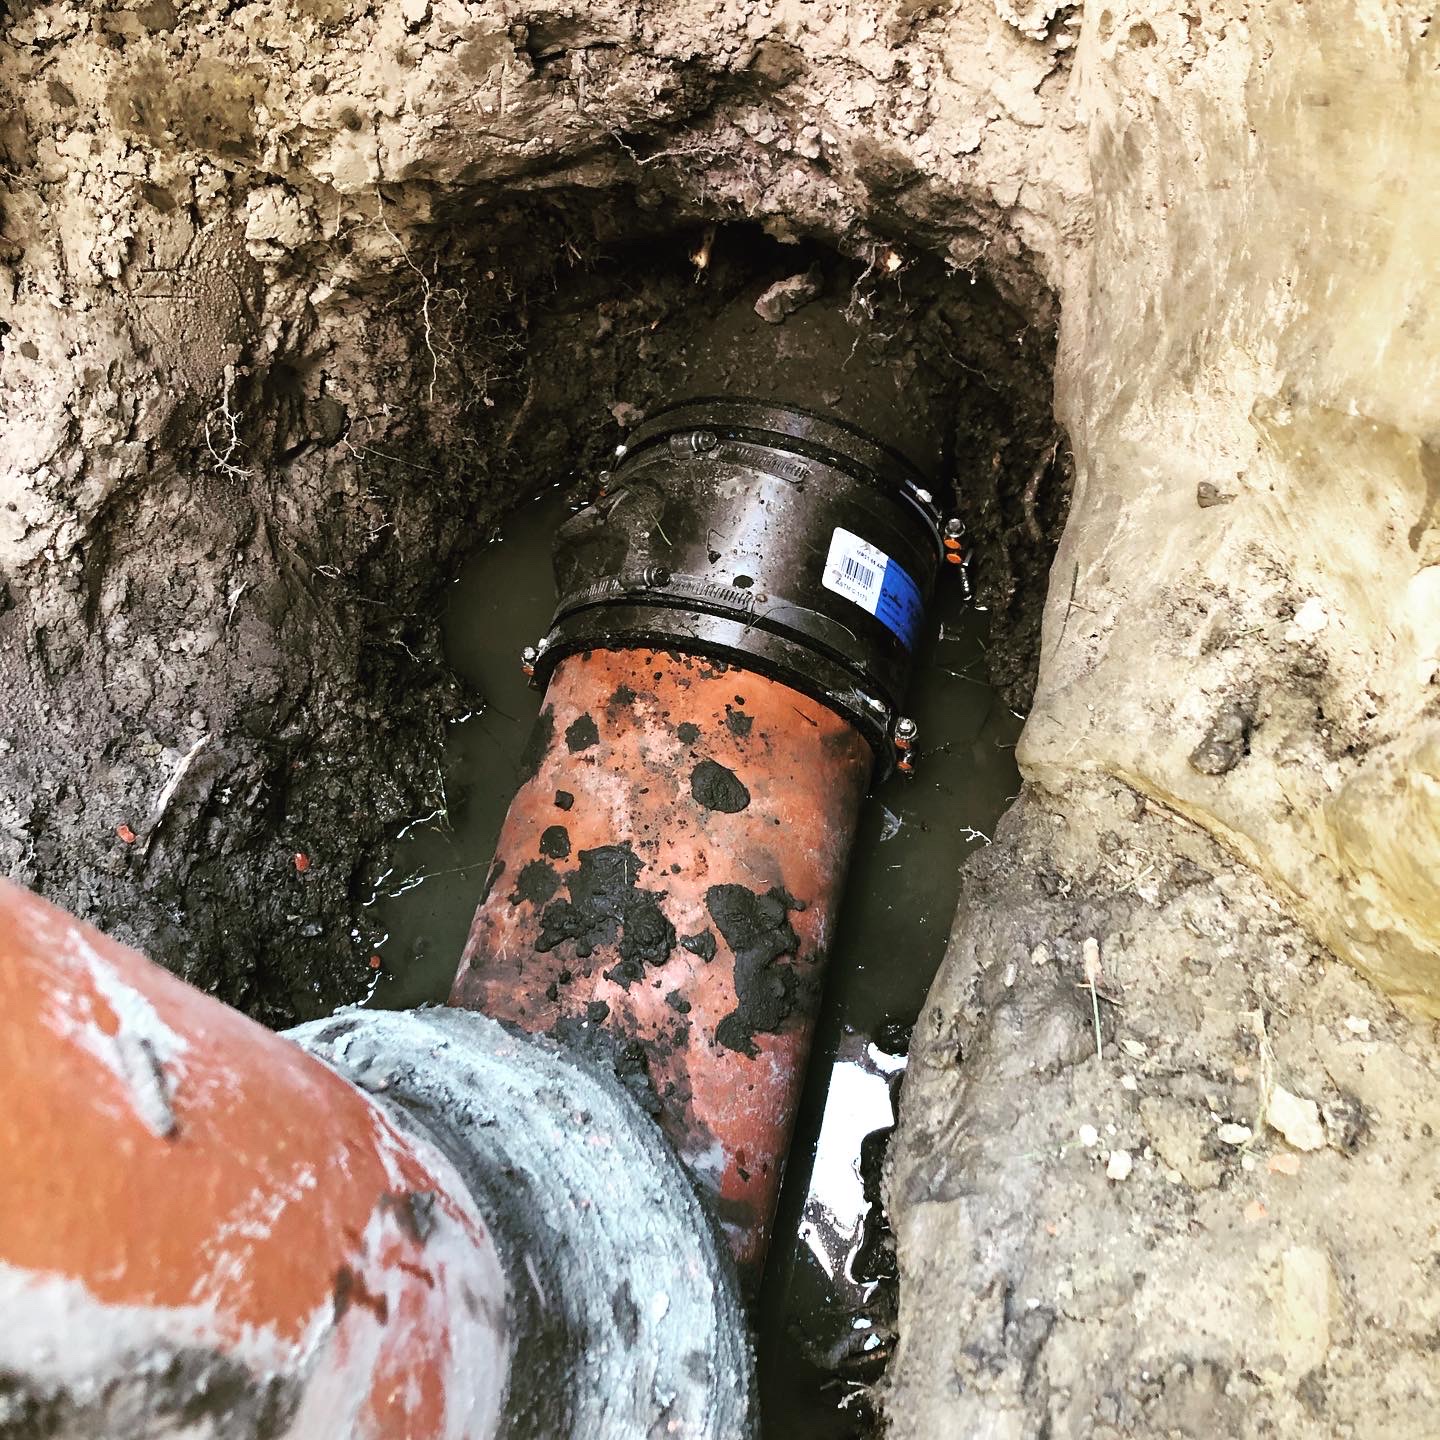 Chicago Sewer and Drain Professionals